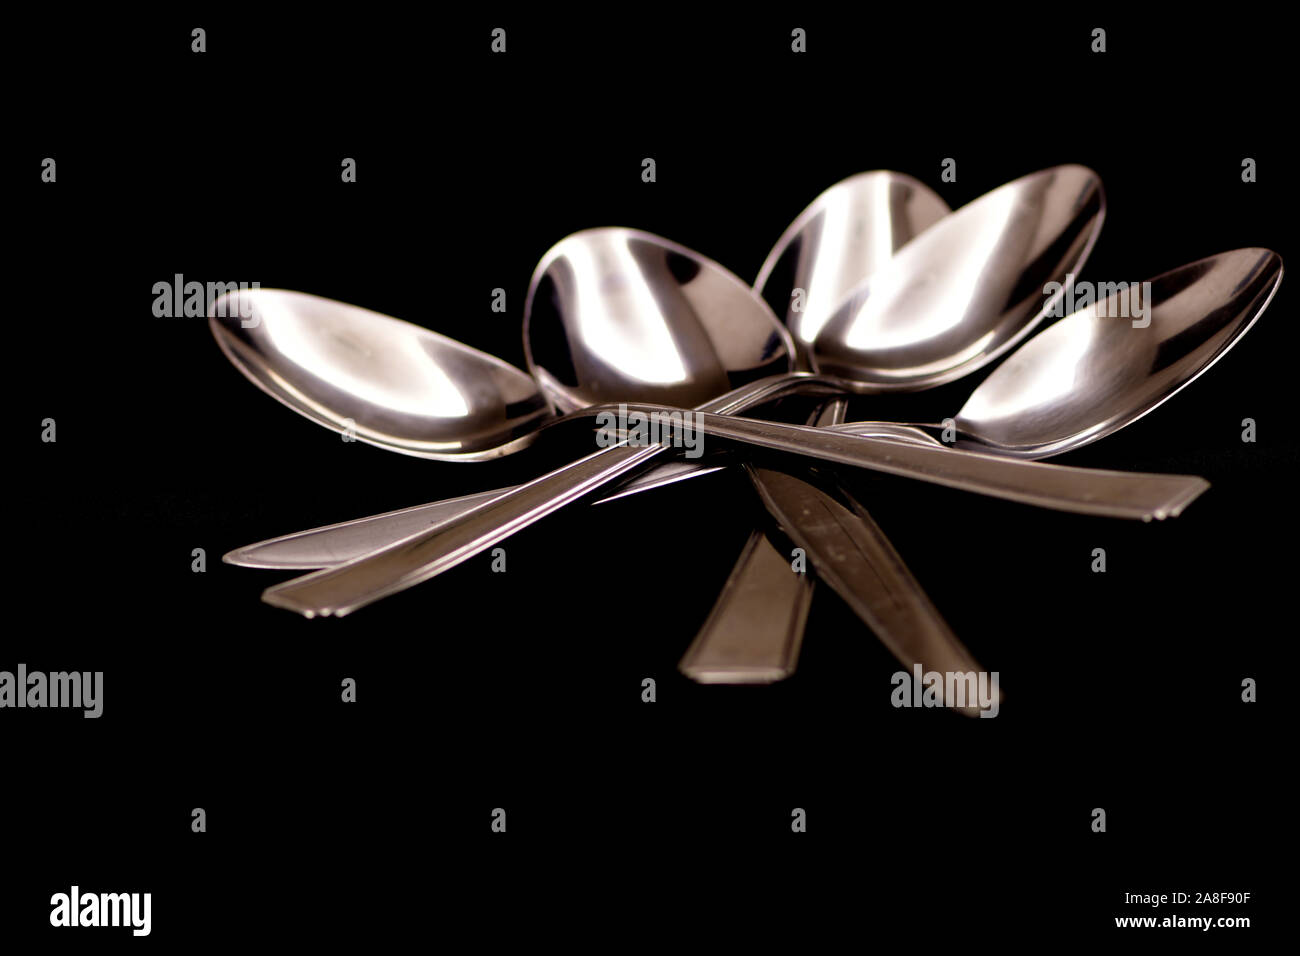 Spoons on black back ground Stock Photo